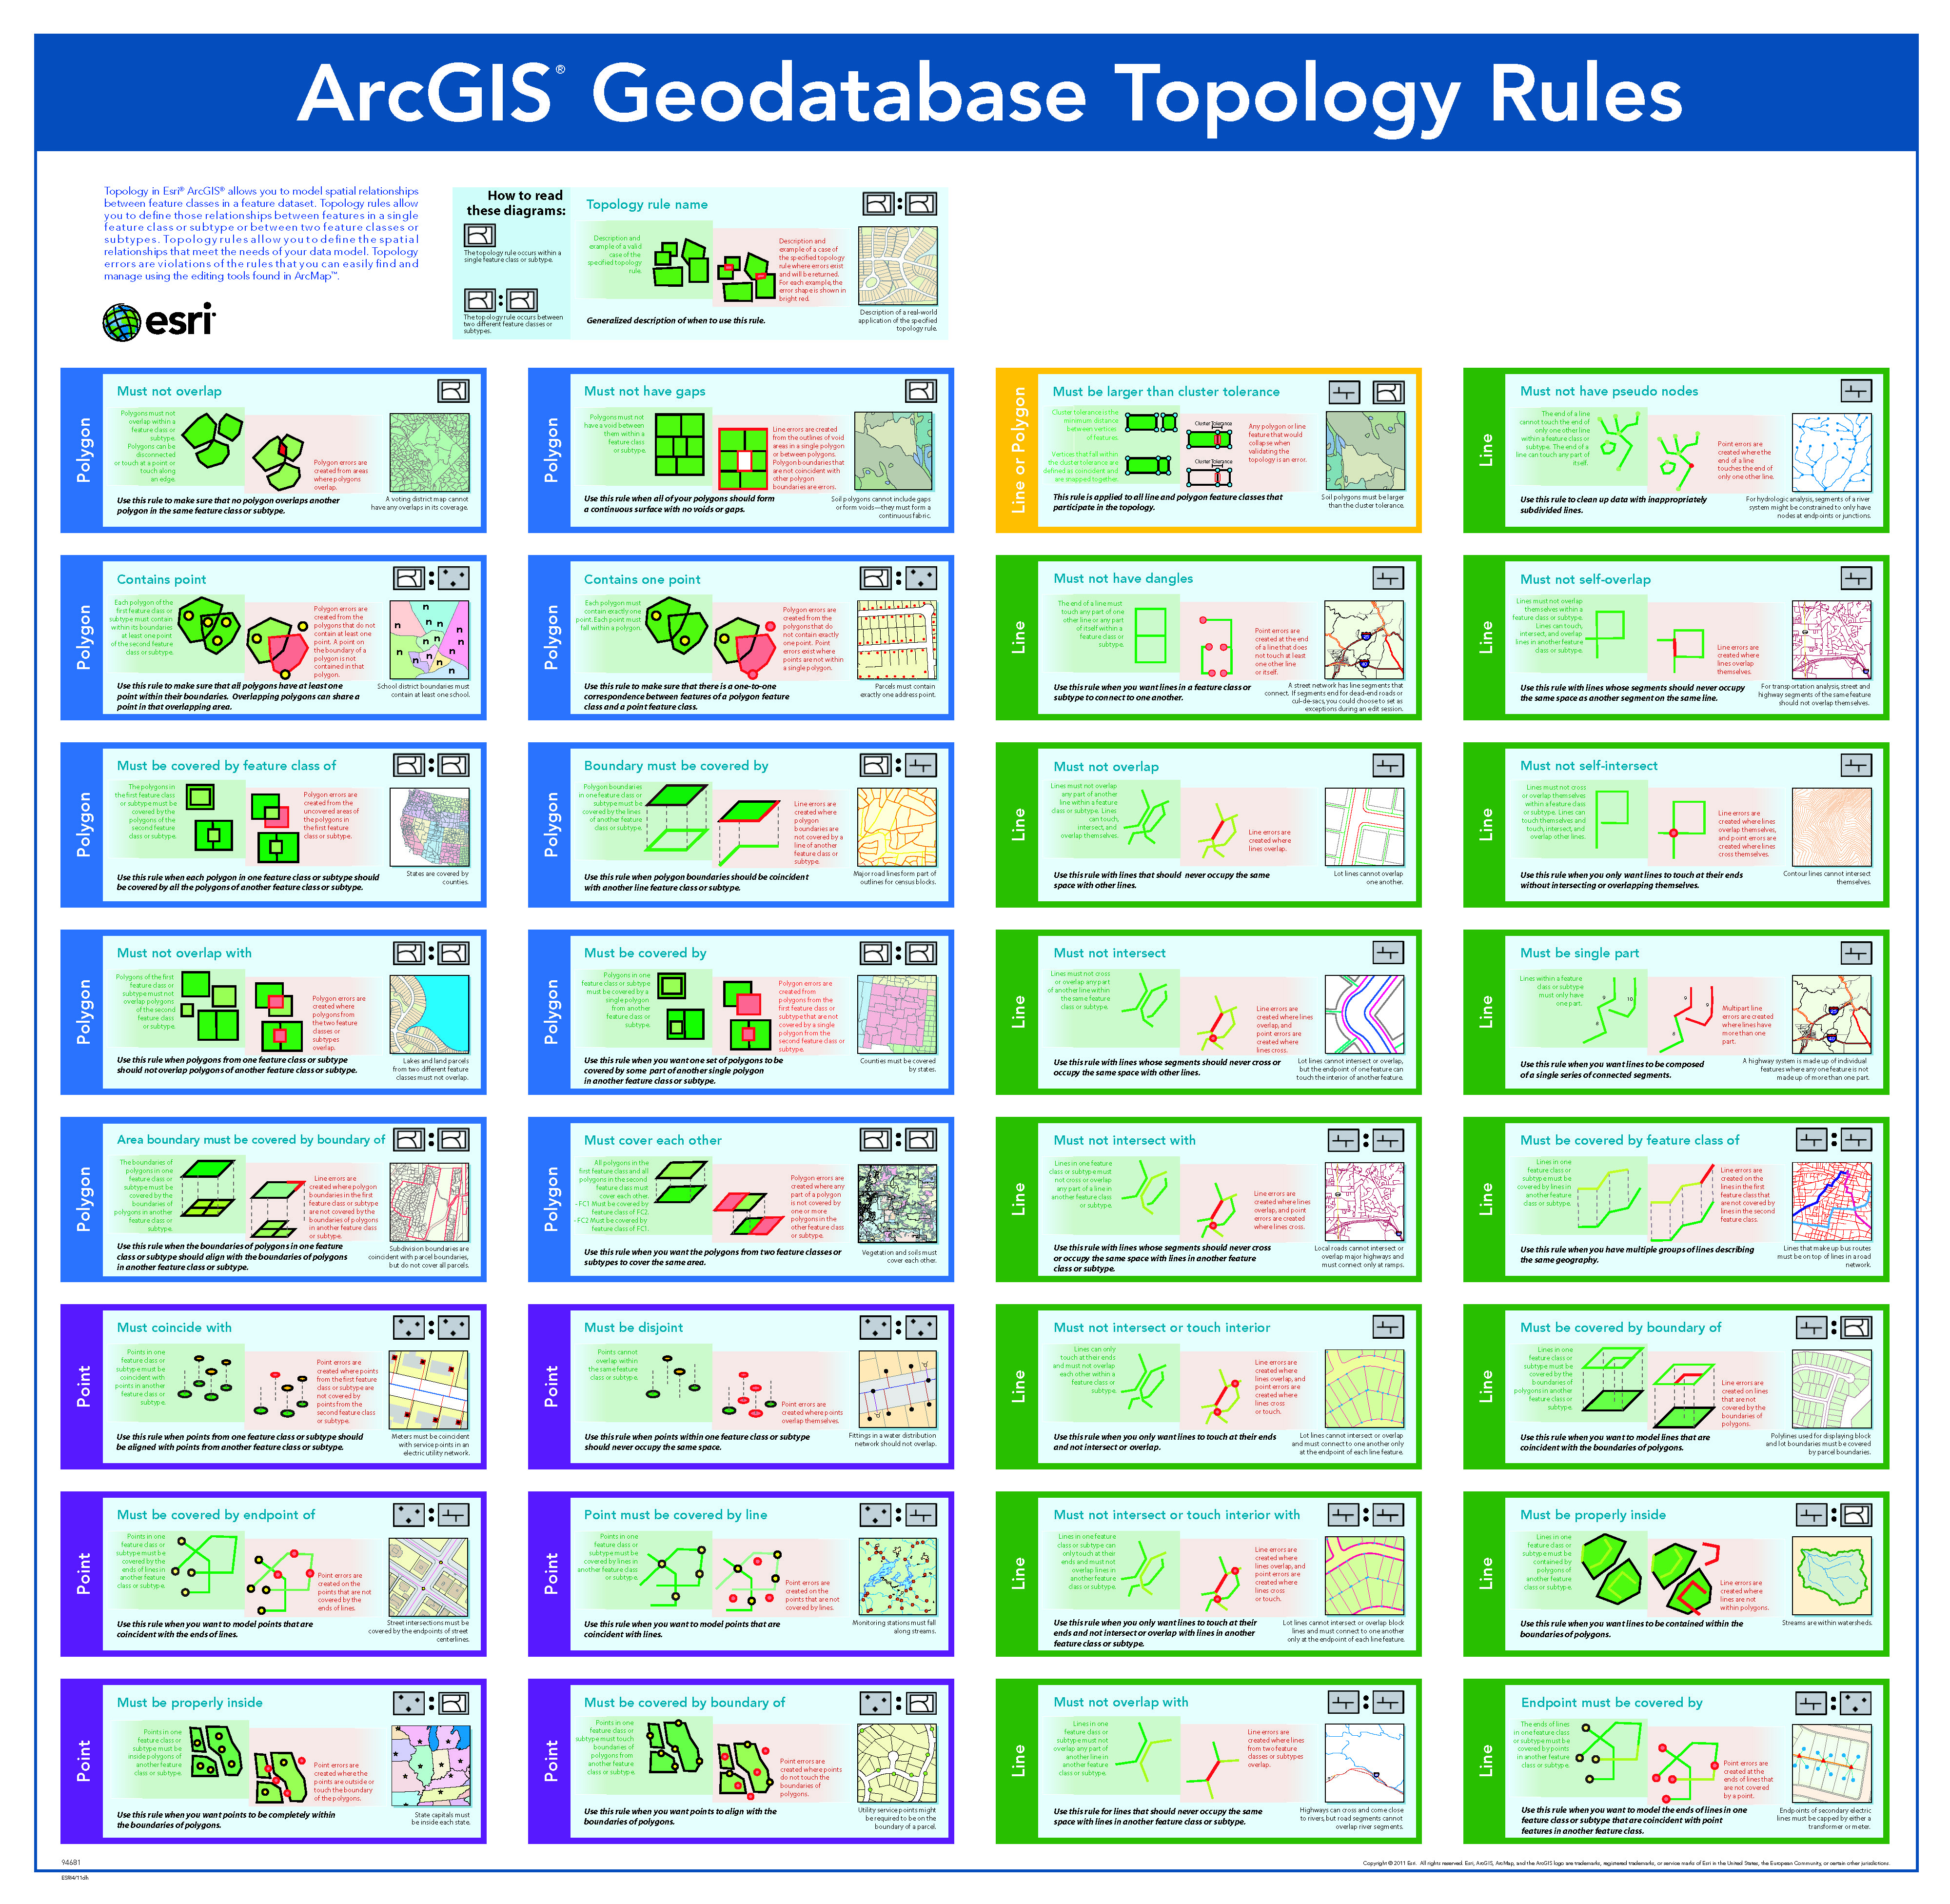 The 32 different topolgy rules that you can apply to one or more feature datasets in ArcGIS